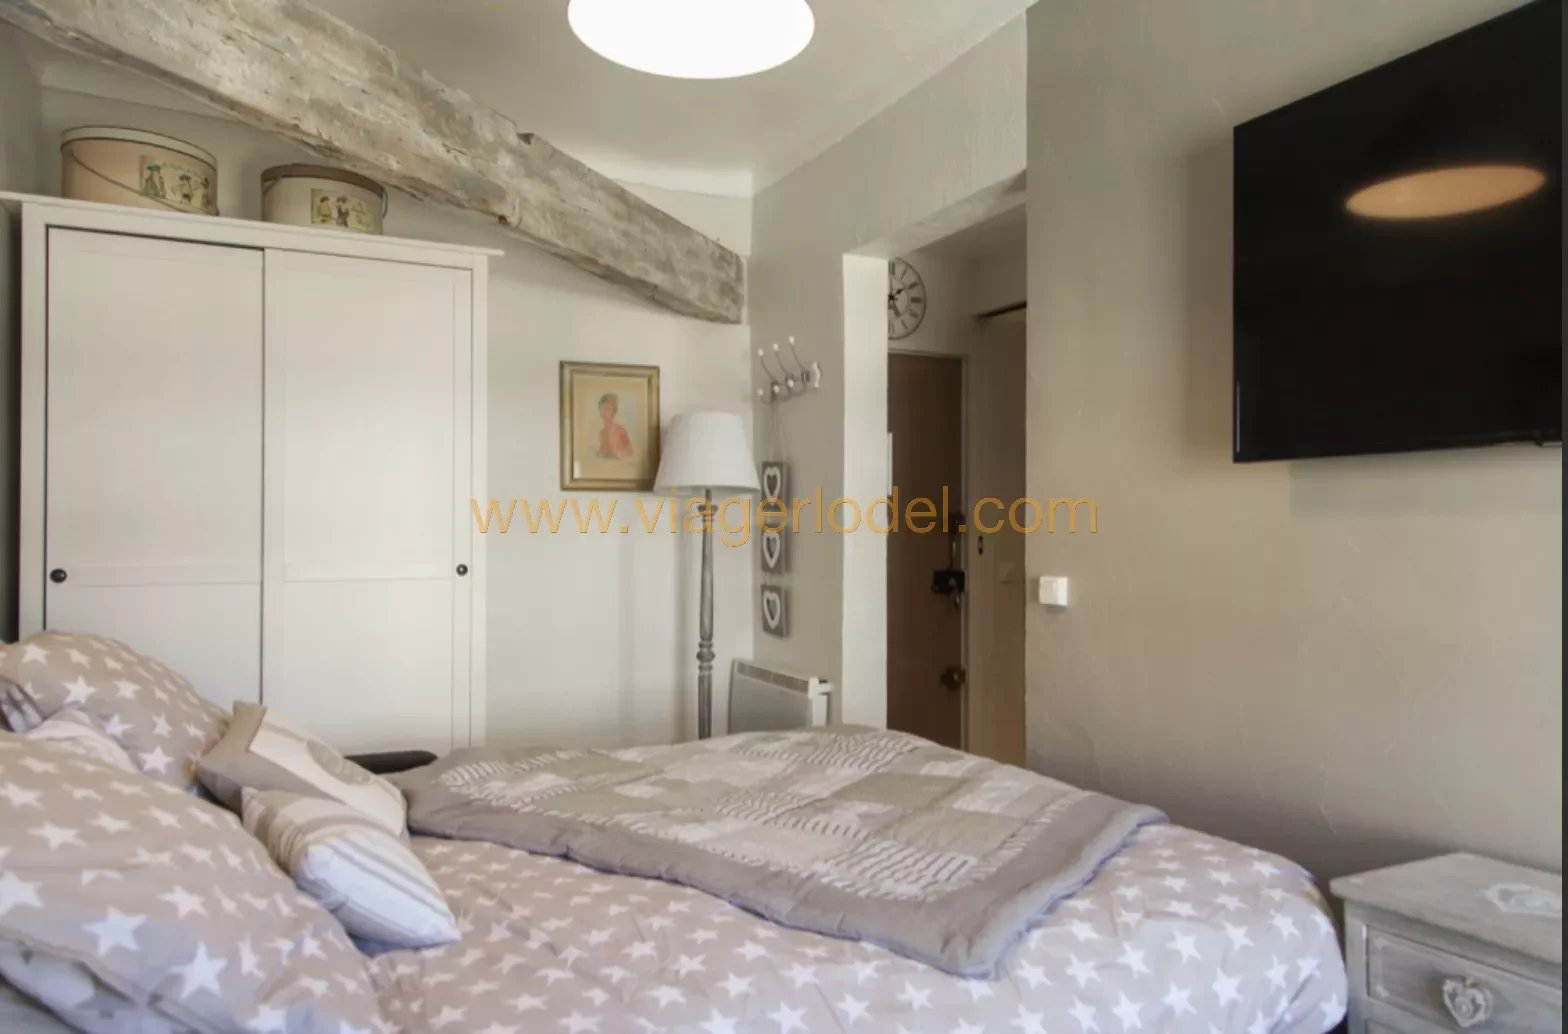 Ref.: 9226 - LIFE ANNUITY - NICE (06) - Rented flat